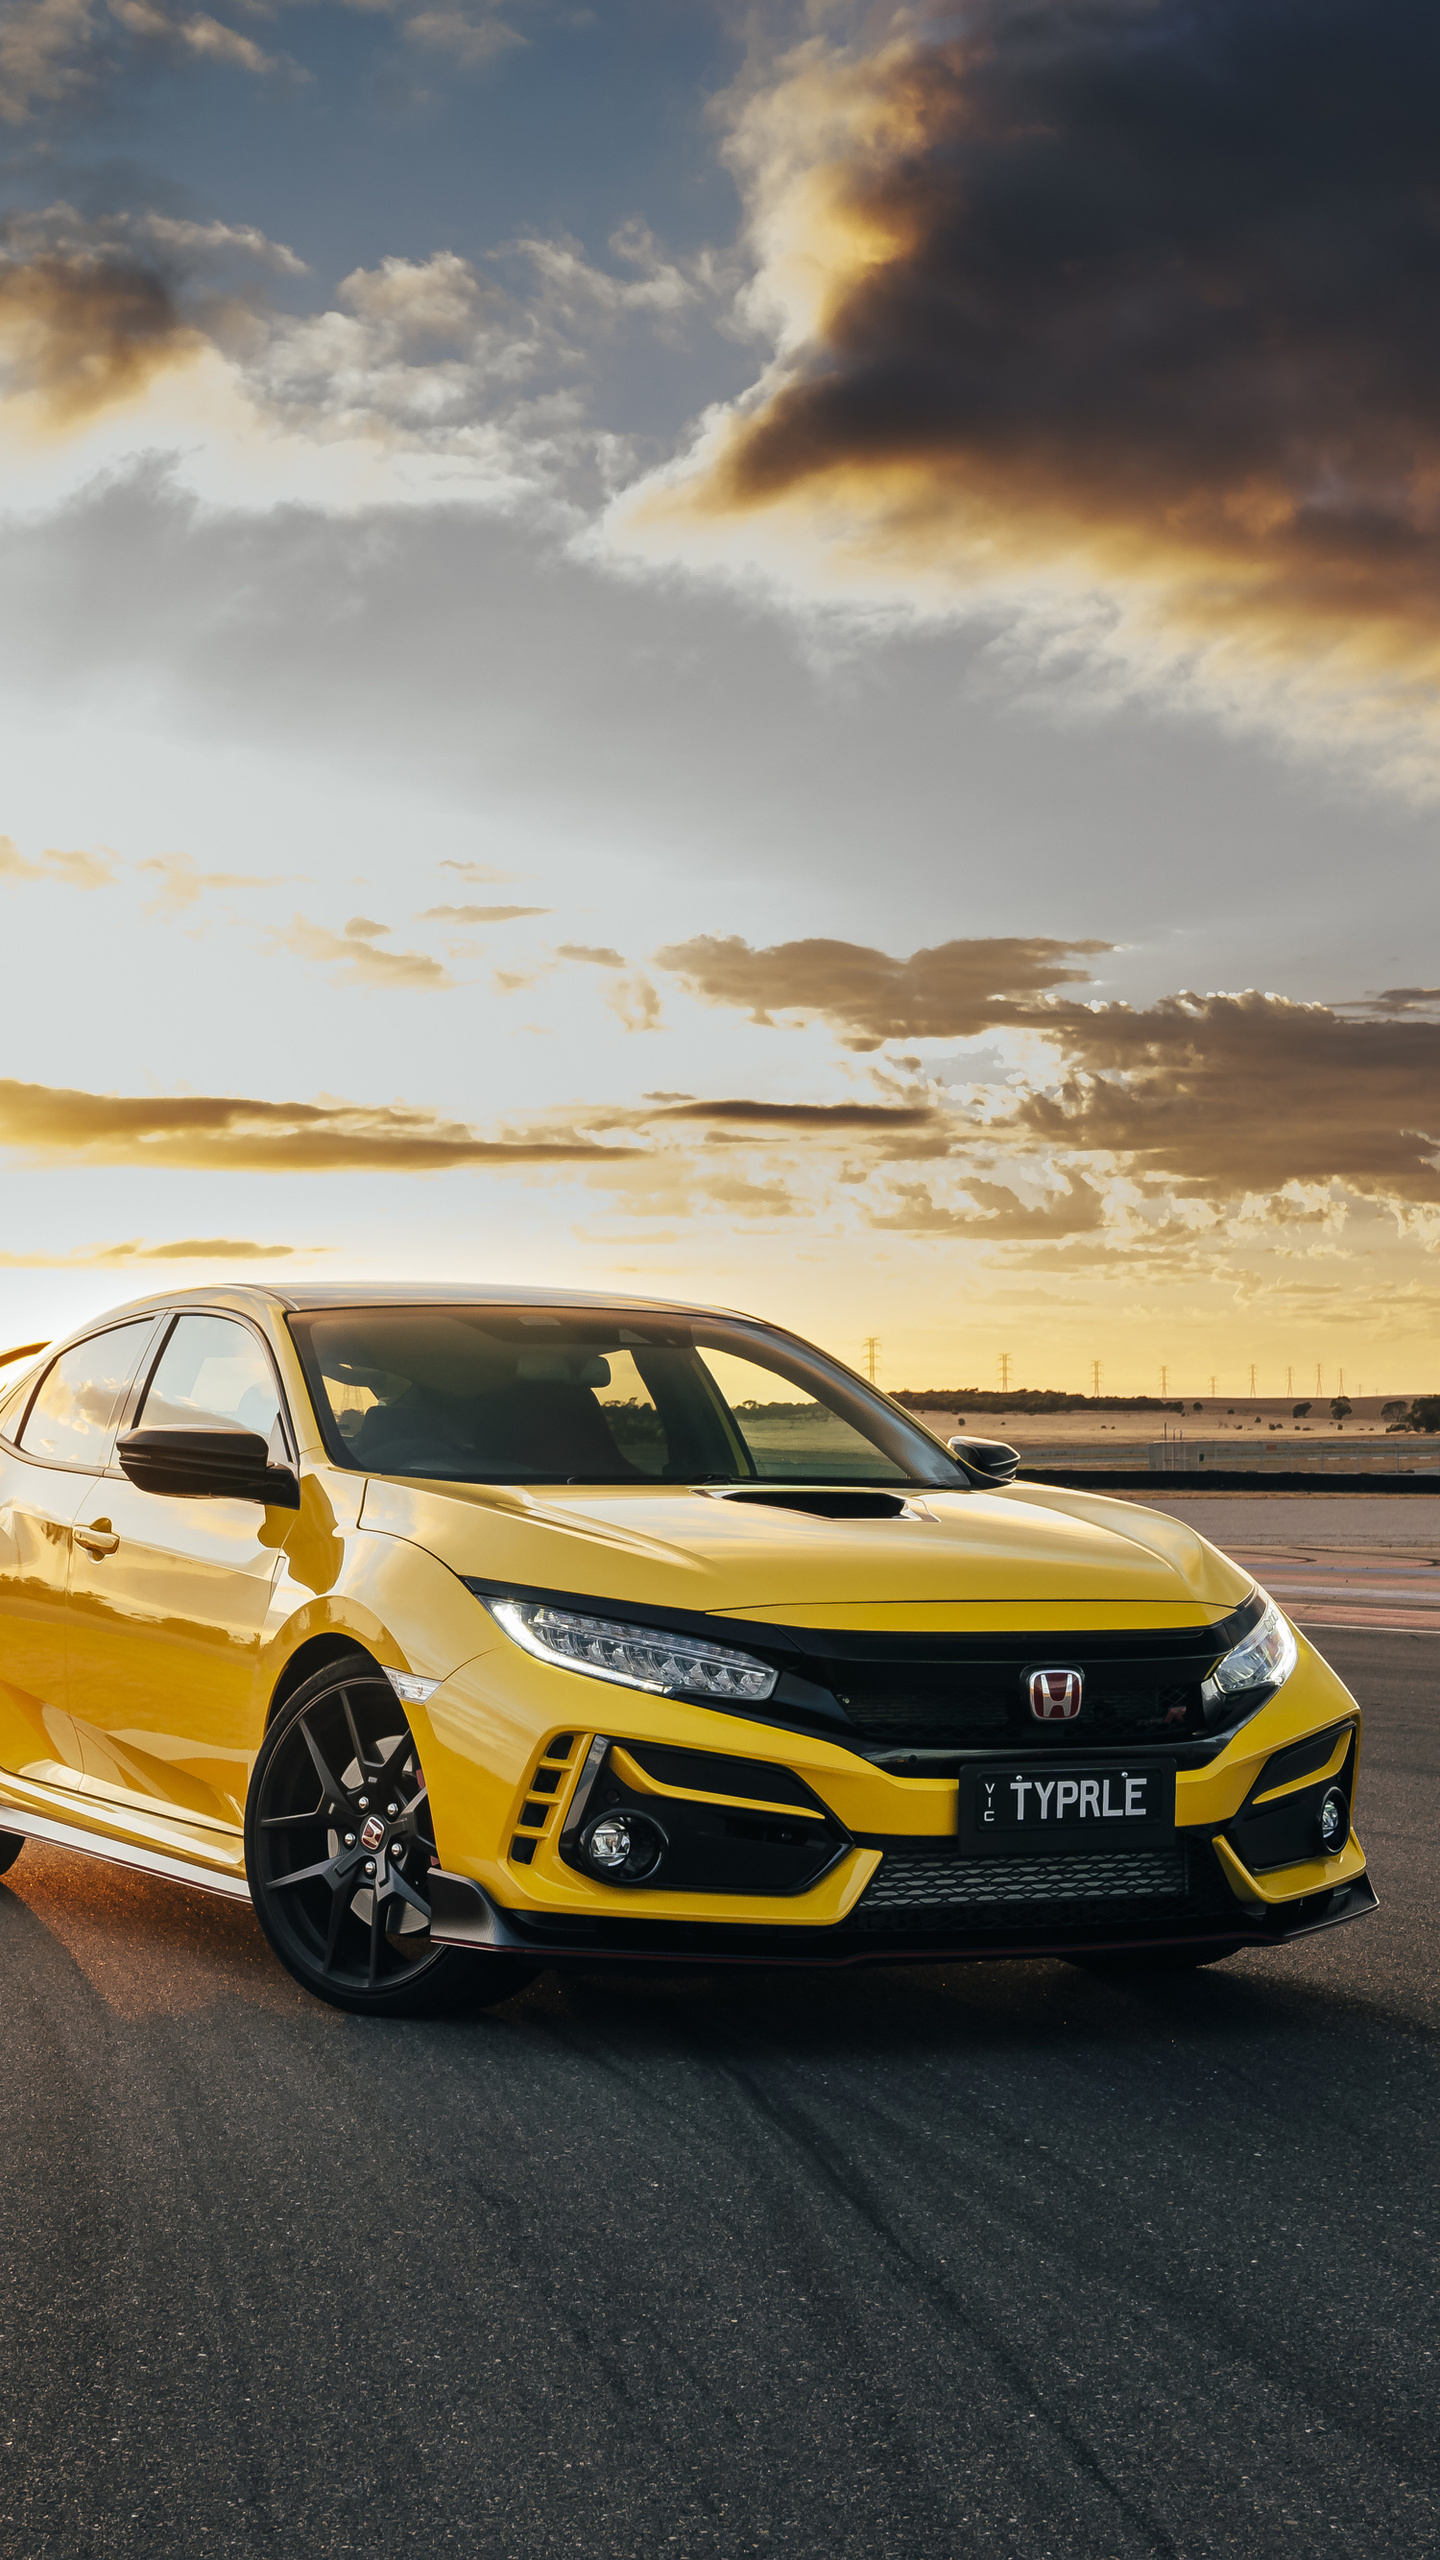 1440x2560 Honda Civic Type R Limited Edition Samsung Galaxy S6 S7 Google Pixel Xl Nexus 6 6p Lg G5 Hd 4k Wallpapers Images Backgrounds Photos And Pictures